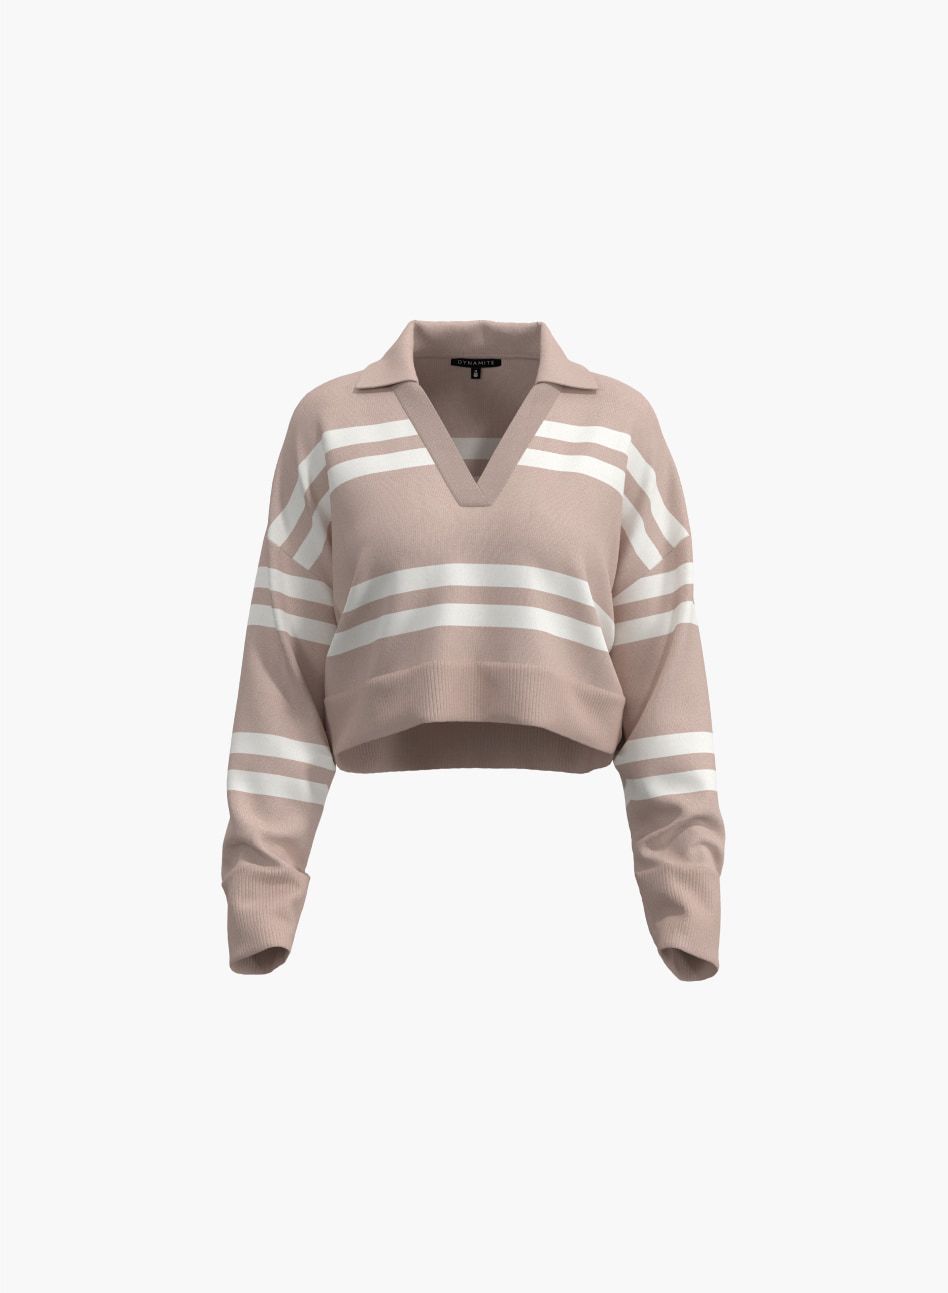 A cropped & striped beige polo sweater.